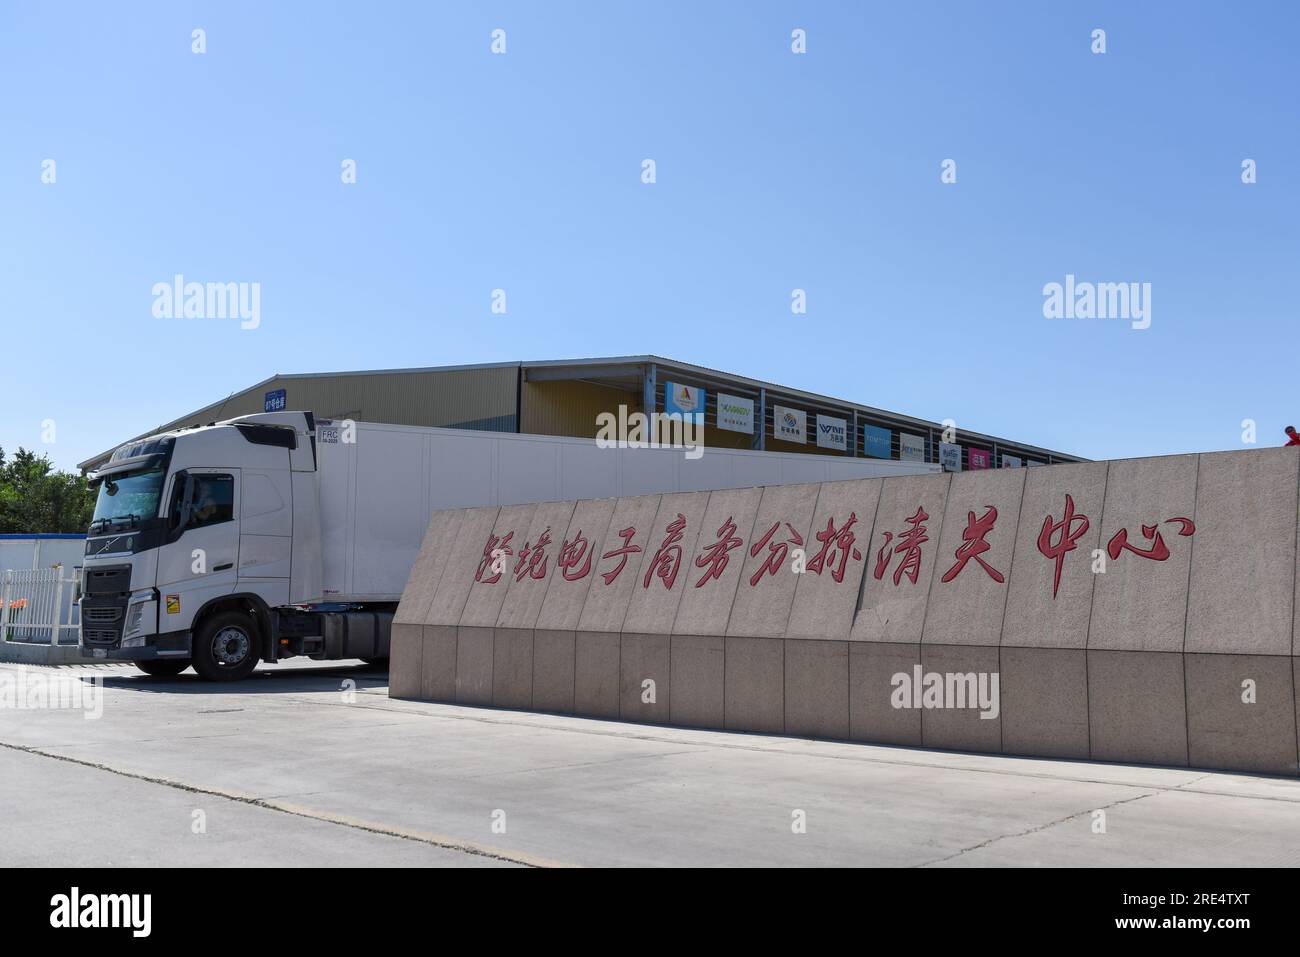 (230725) -- ALATAW PASS, July 25, 2023 (Xinhua) -- A loaded cargo truck drives out of the custom clearance center for the cross-border e-commerce of the Alataw Pass comprehensive bonded area in northwest China's Xinjiang Uygur Autonomous Region, July 24, 2023. In recent years, various measures have been taken to create a better business environment for cross-border e-commerce enterprises in Alataw Pass. The cross-border e-commerce business was launched in the inland port in northwest China's Xinjiang Uygur Autonomous Region in January 2020. In the first half of this year, more than 14.50 milli Stock Photo